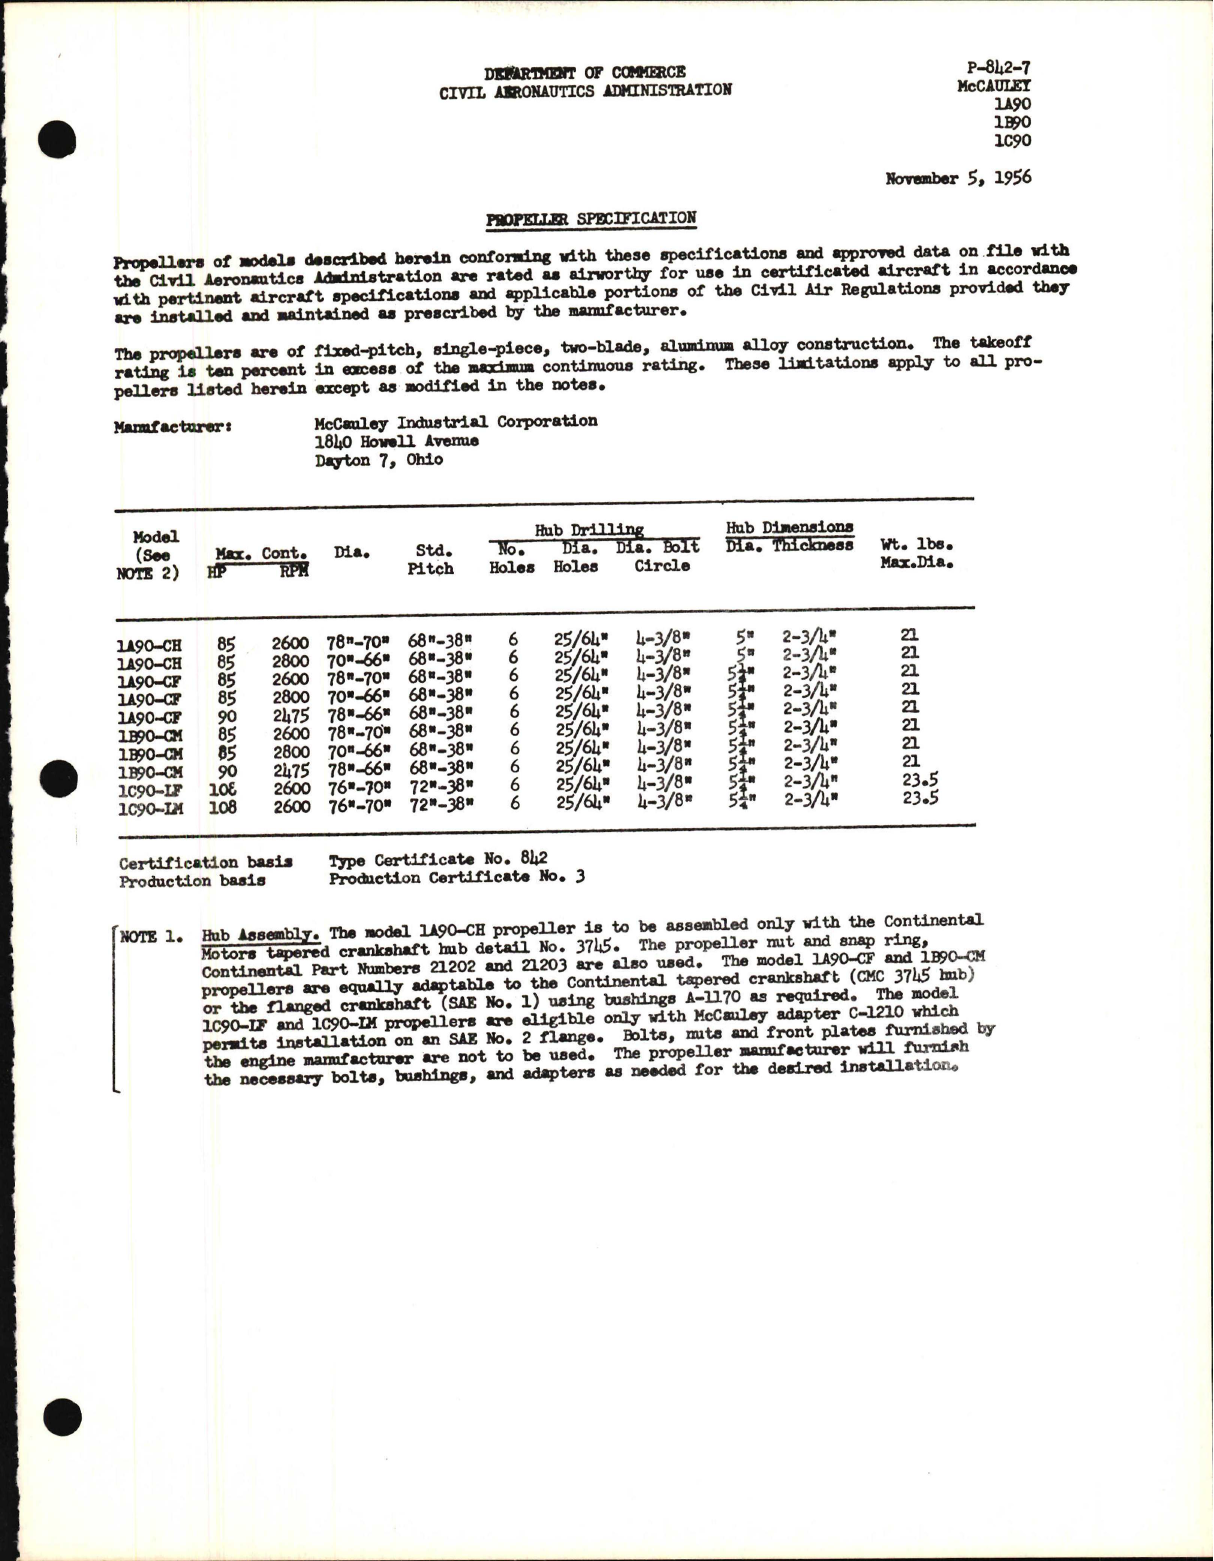 Sample page 1 from AirCorps Library document: 1A90, 1B90, and 1C90